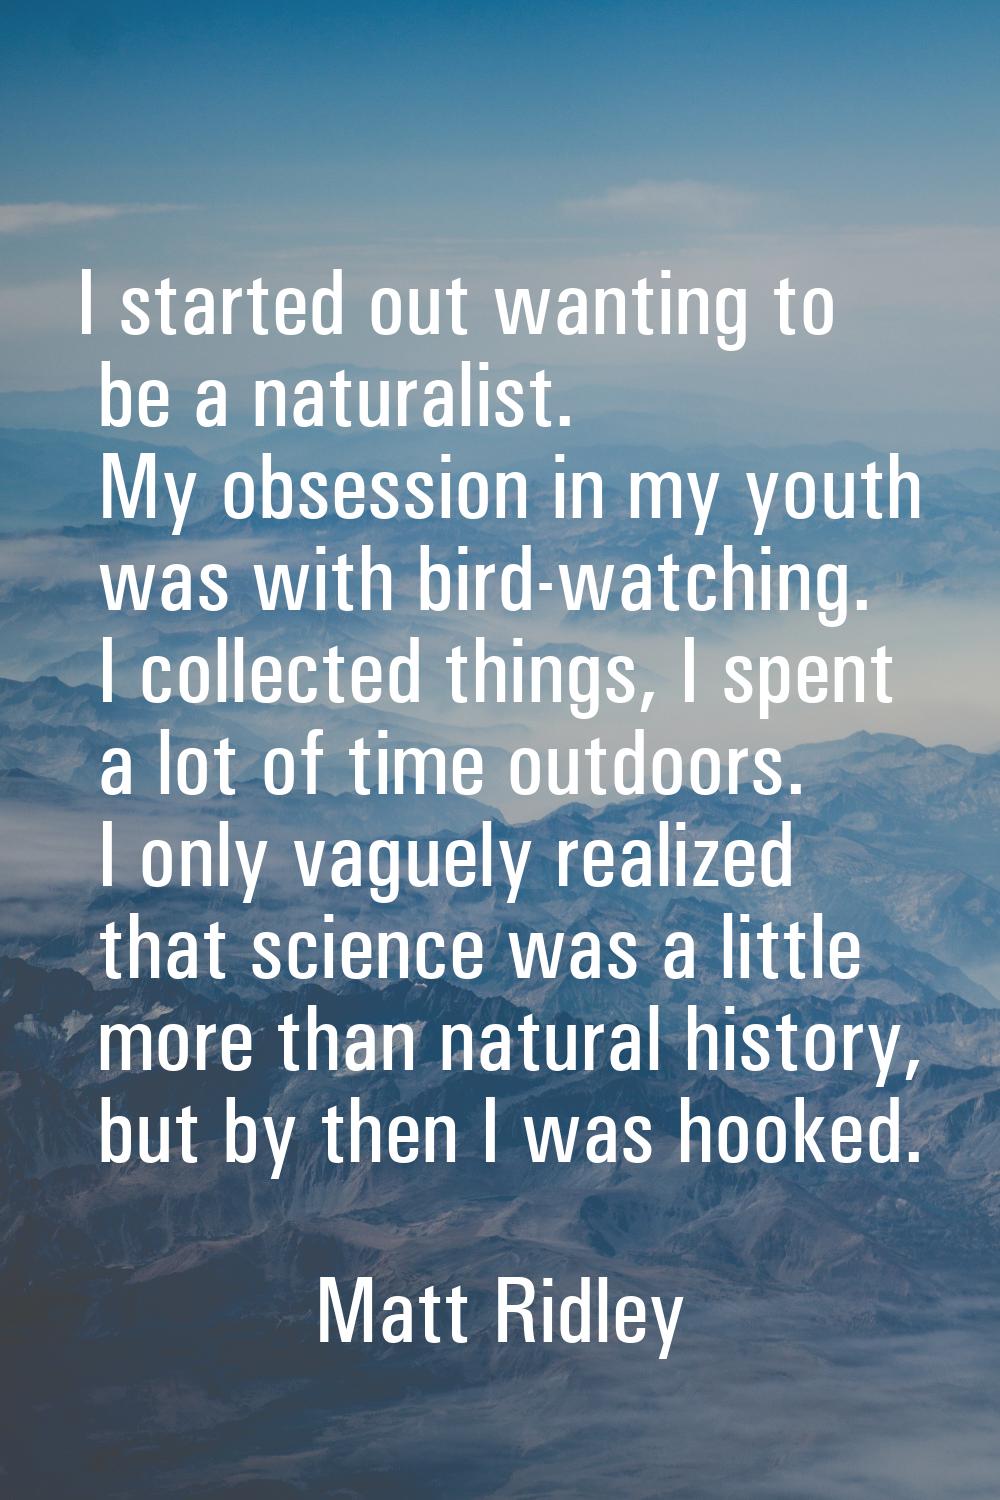 I started out wanting to be a naturalist. My obsession in my youth was with bird-watching. I collec